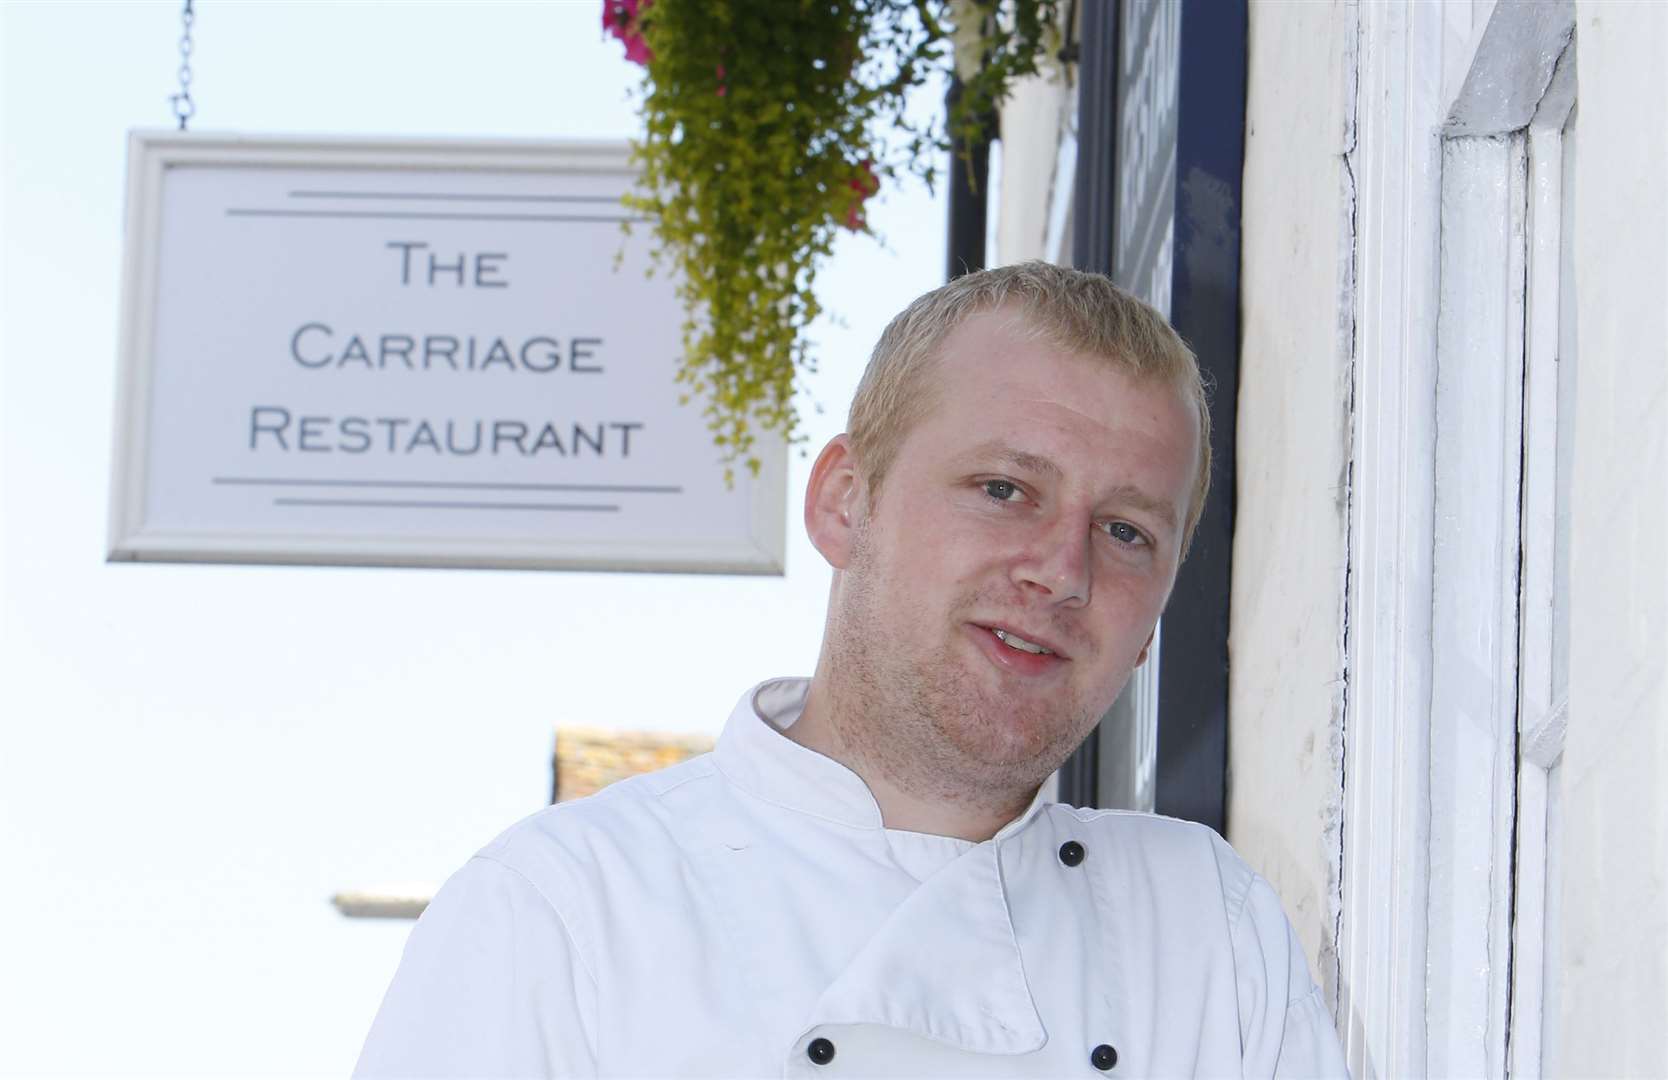 The Carriage Restaurant co-owner and chef, Nicky Martin. Picture: Andy Jones